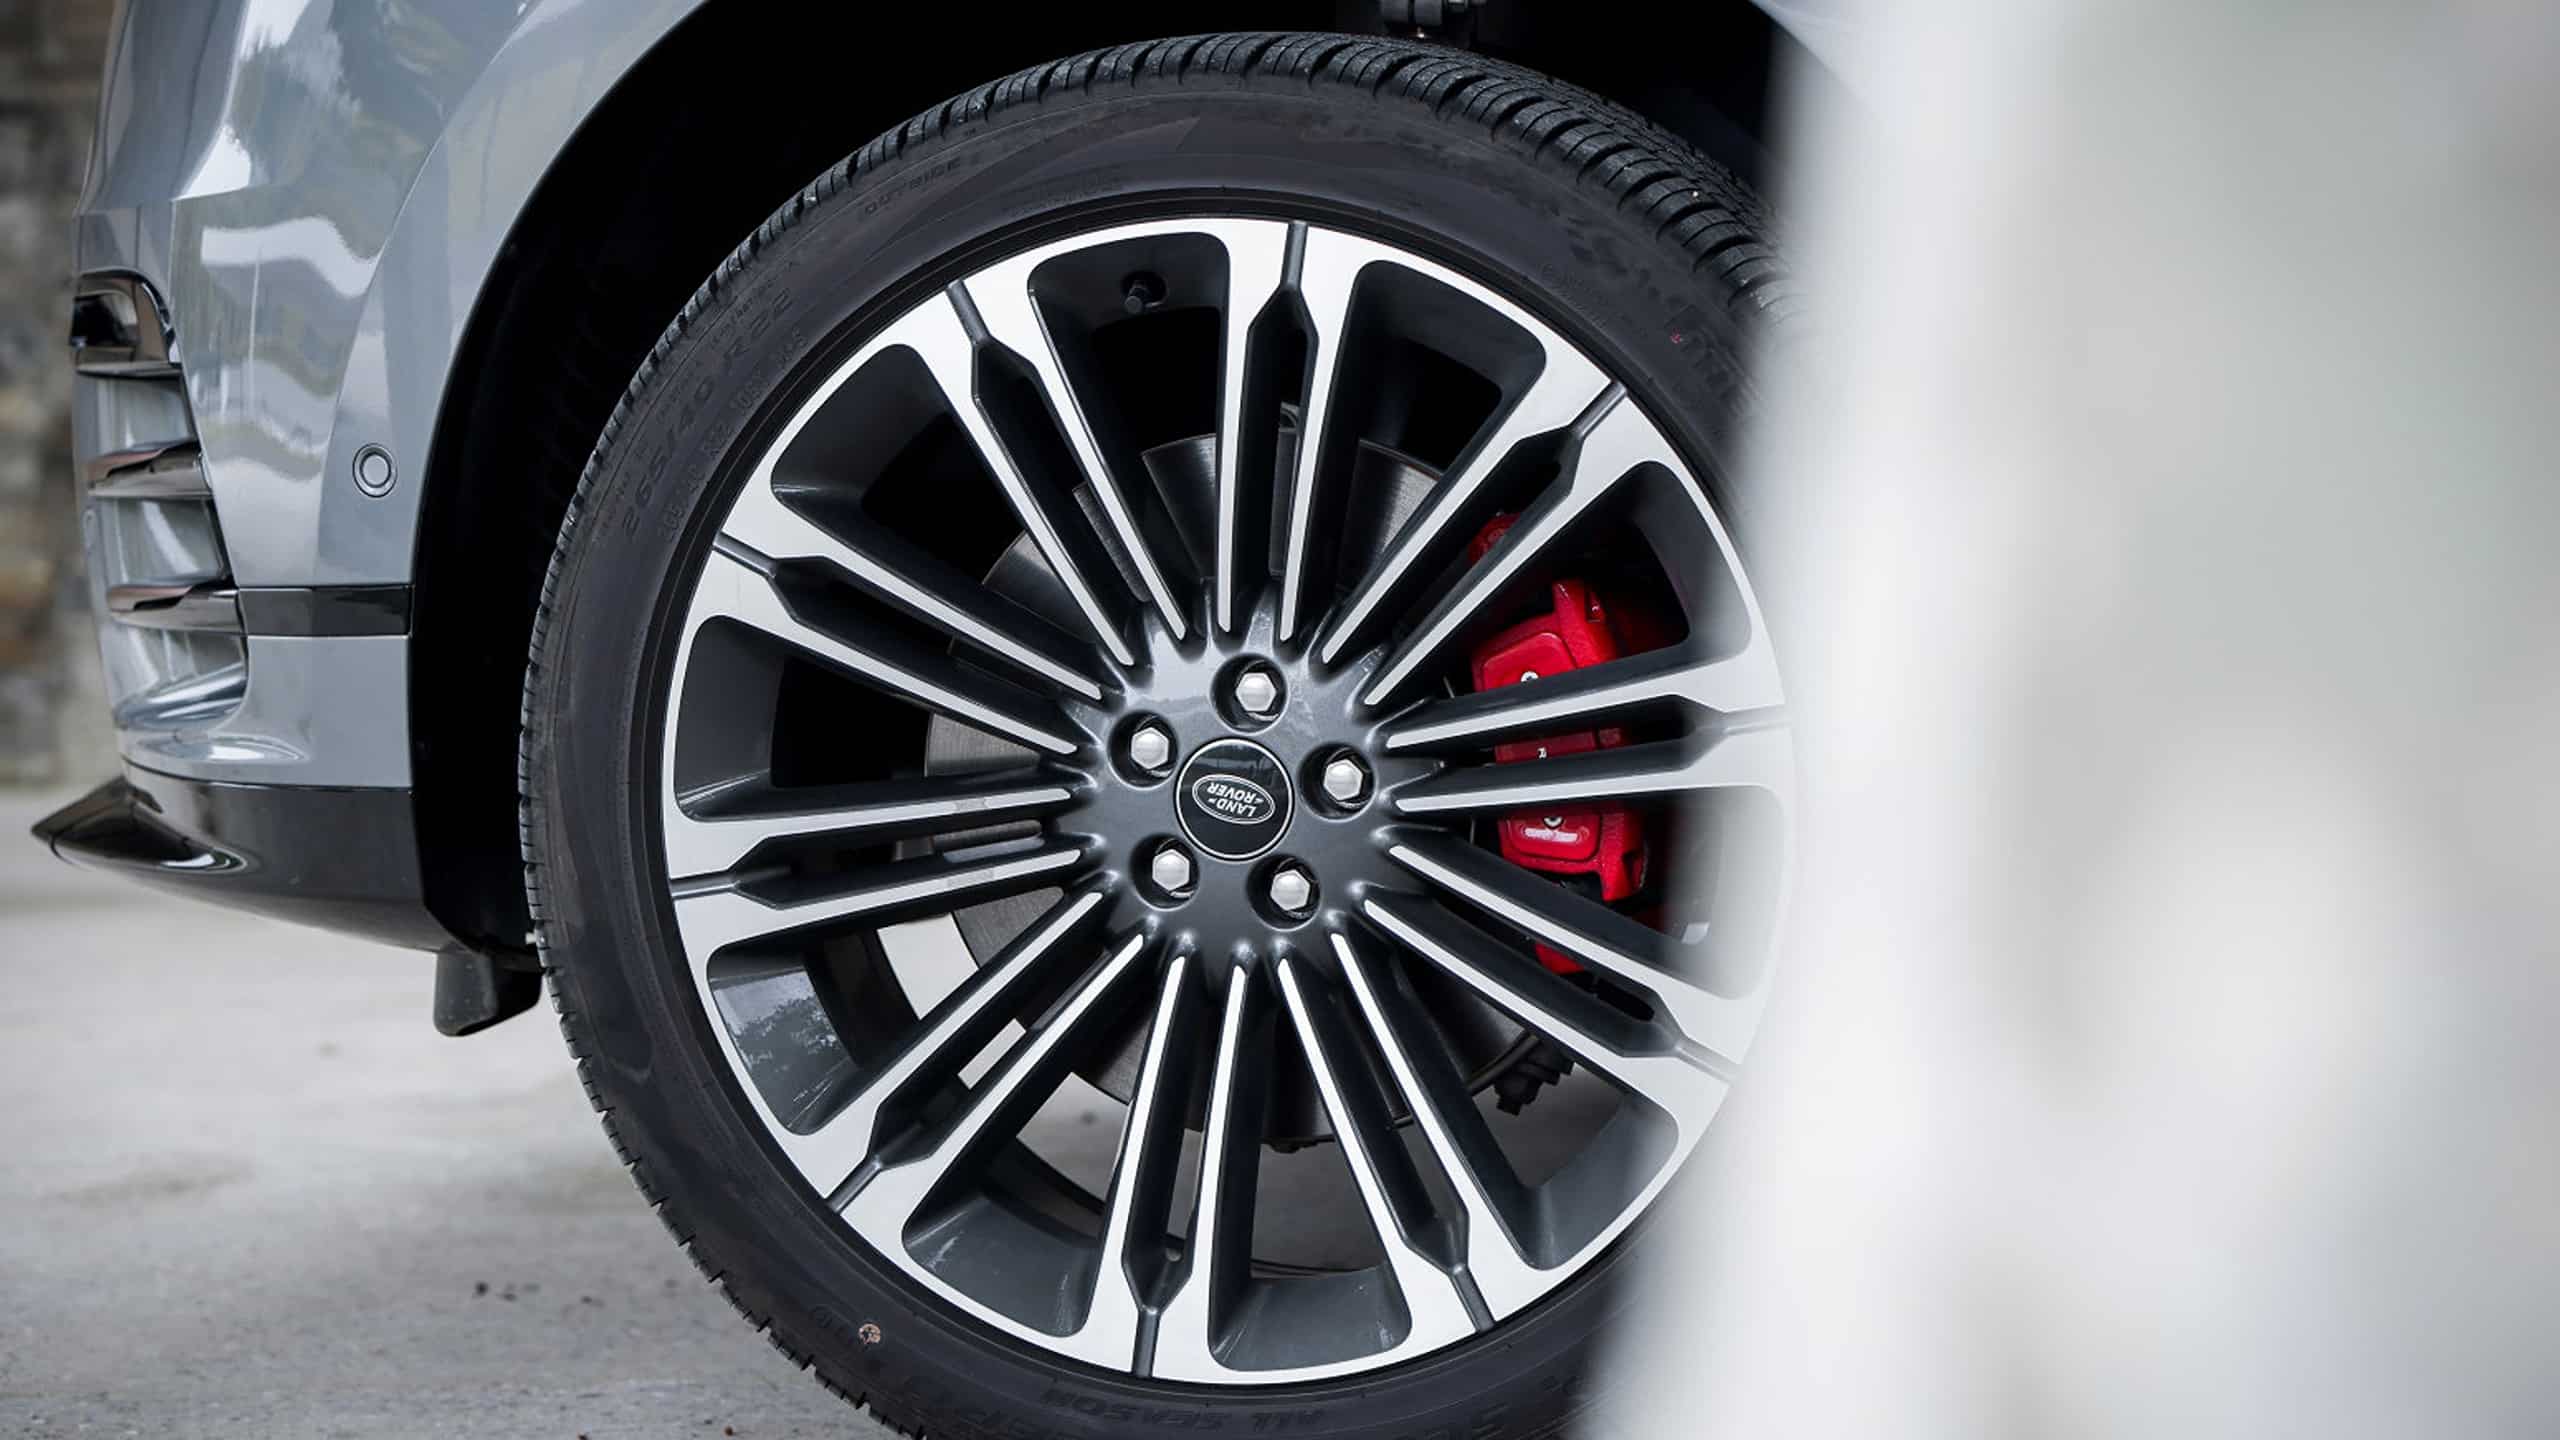 Range Rover Velar is equipped with 22-inch diamond-cut bright dark gray aluminum alloy wheels and red brake calipers